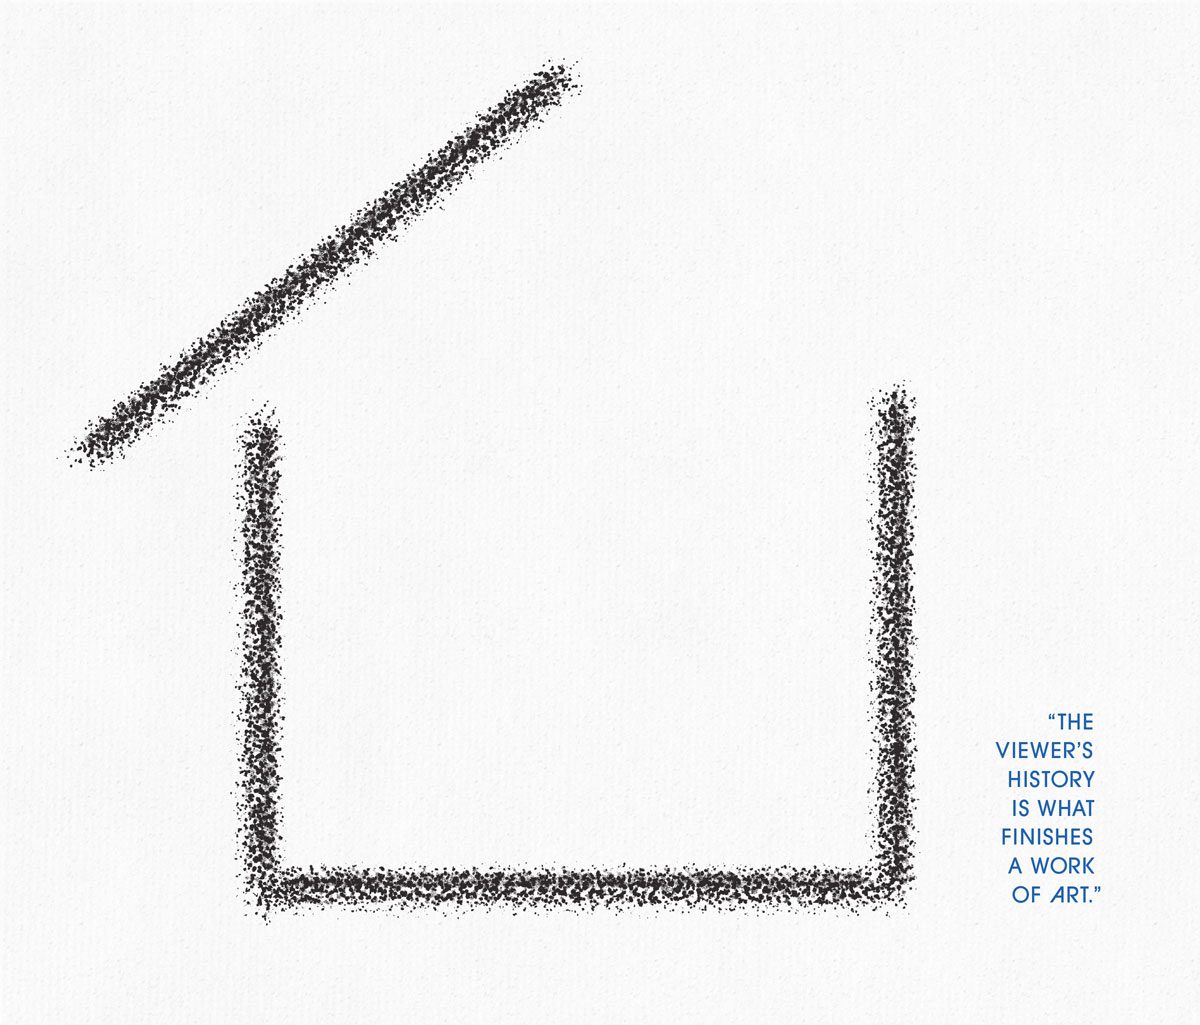 An illustration of what could be an incomplete house or a box with the lid off, with the associated quote of The viewer's history completes a work of art.